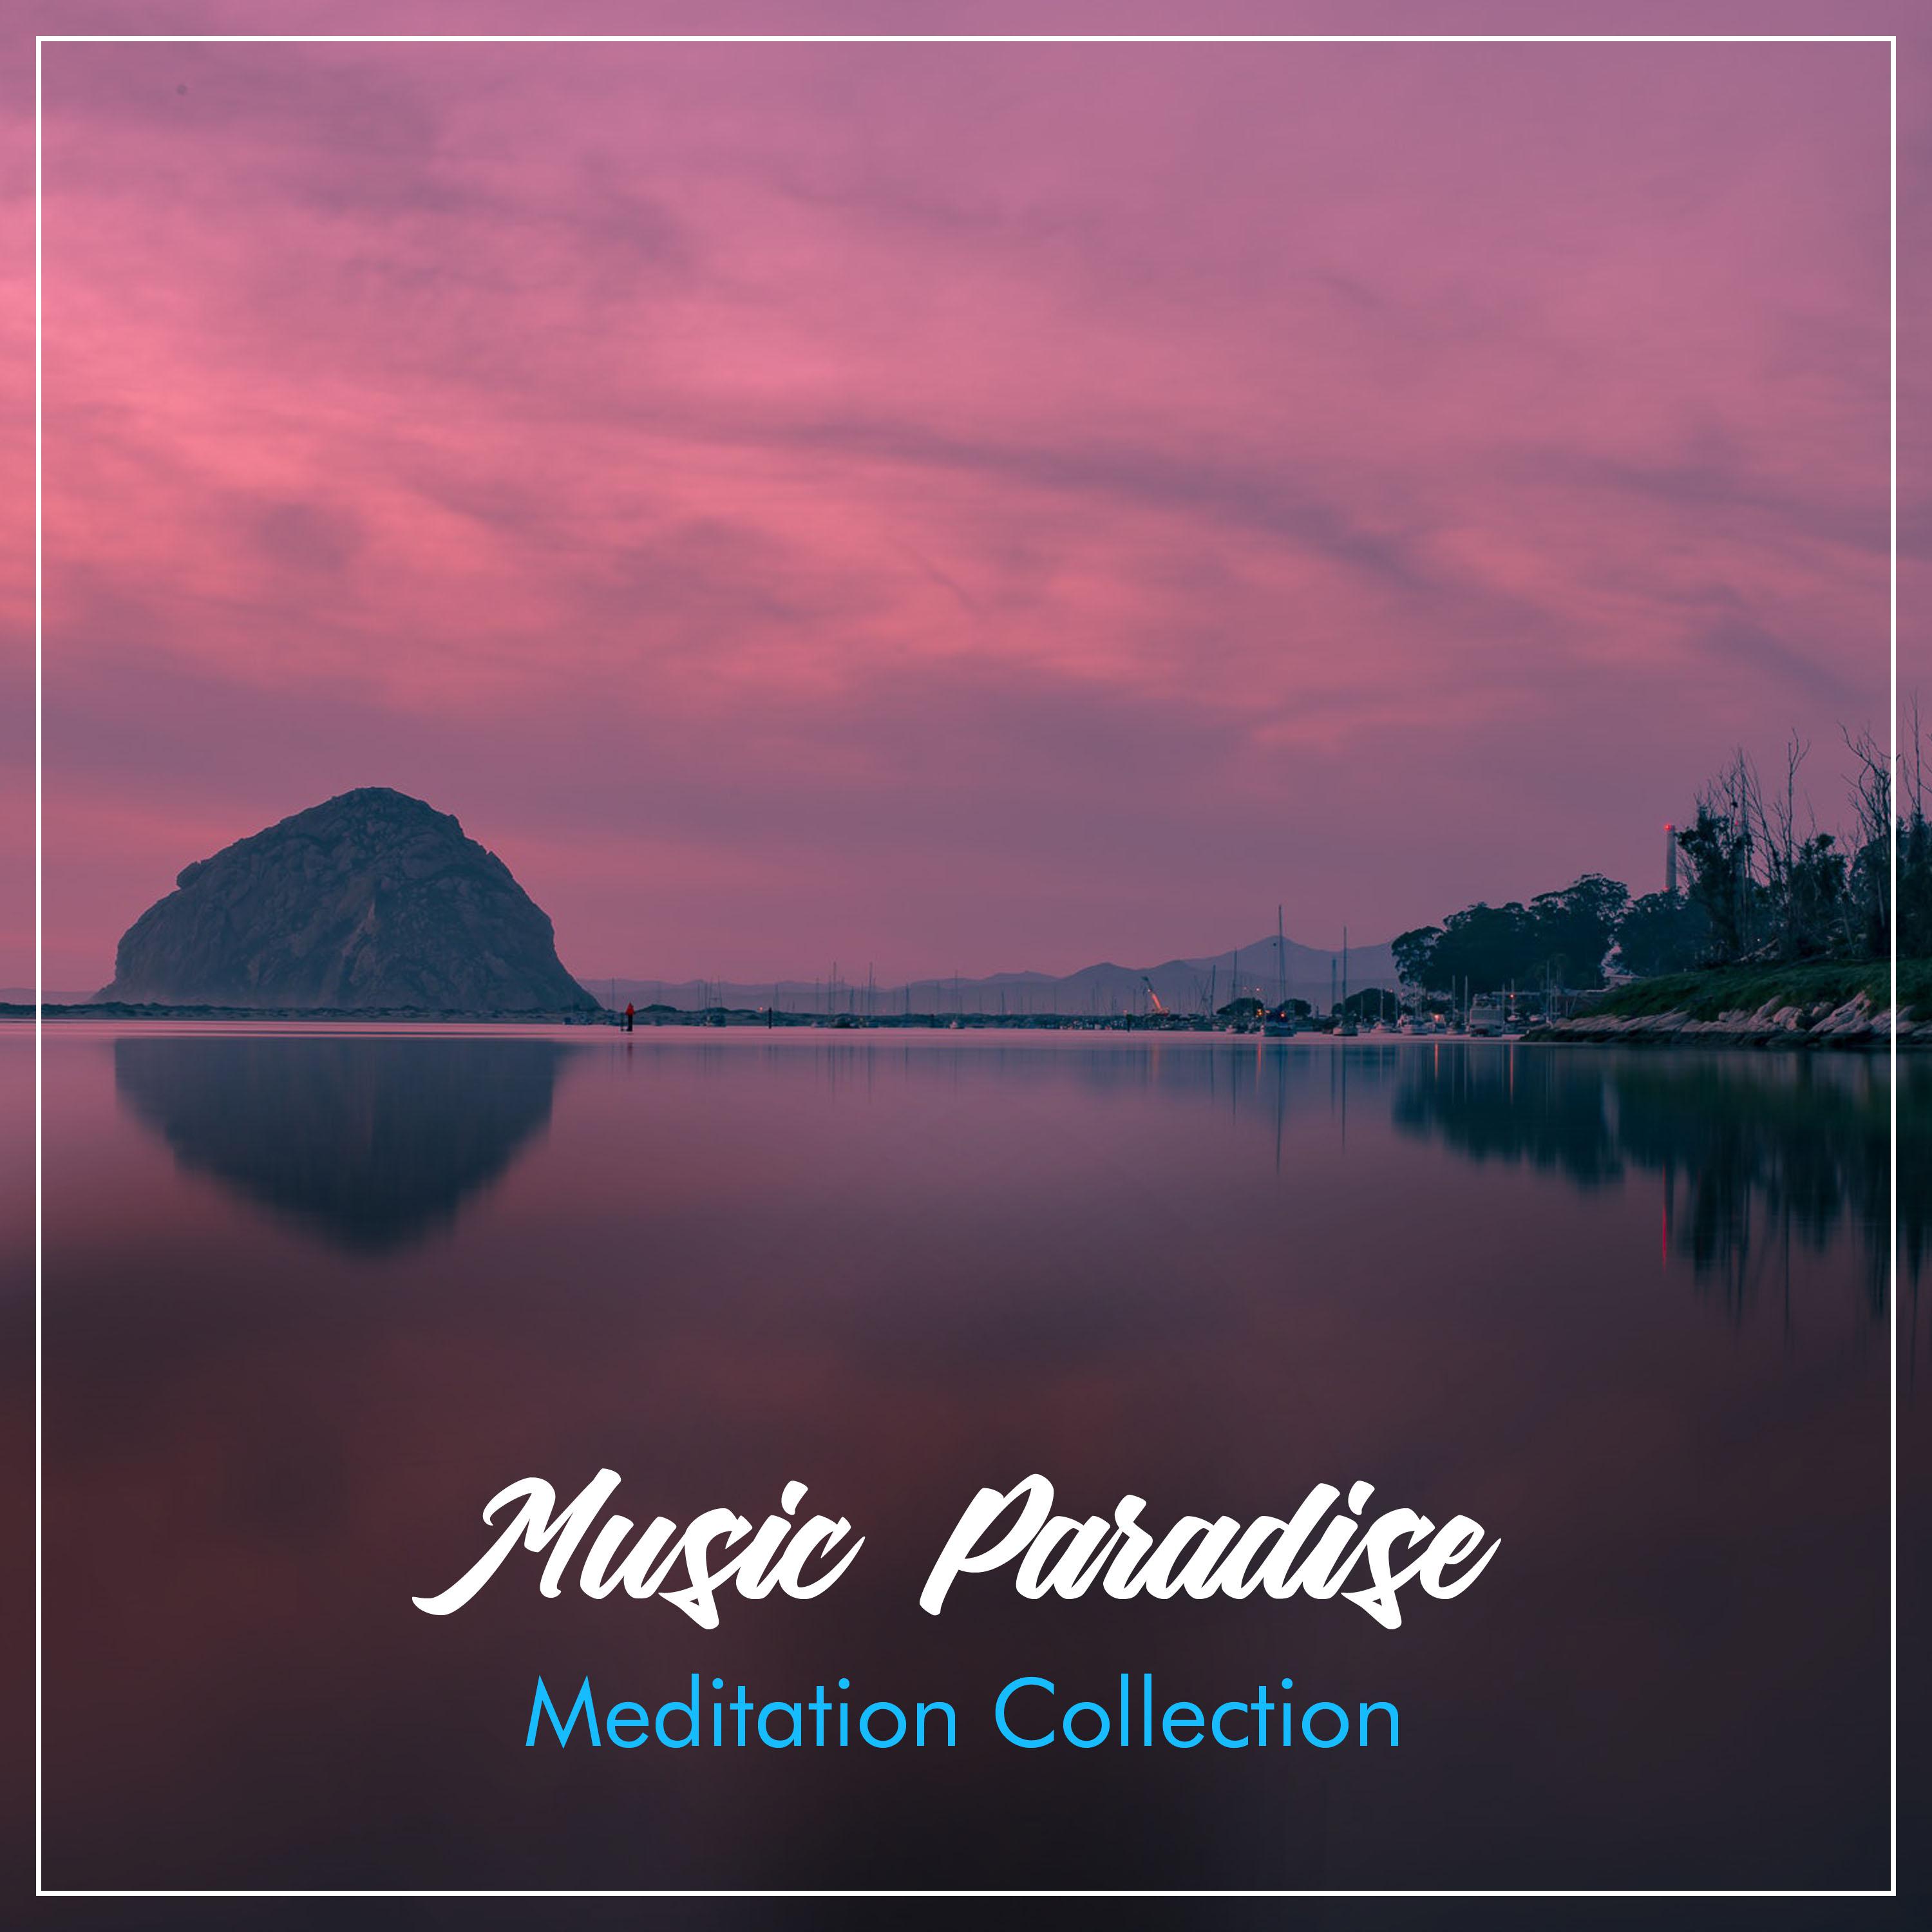 14 Meditaion Collection - Music Paradise